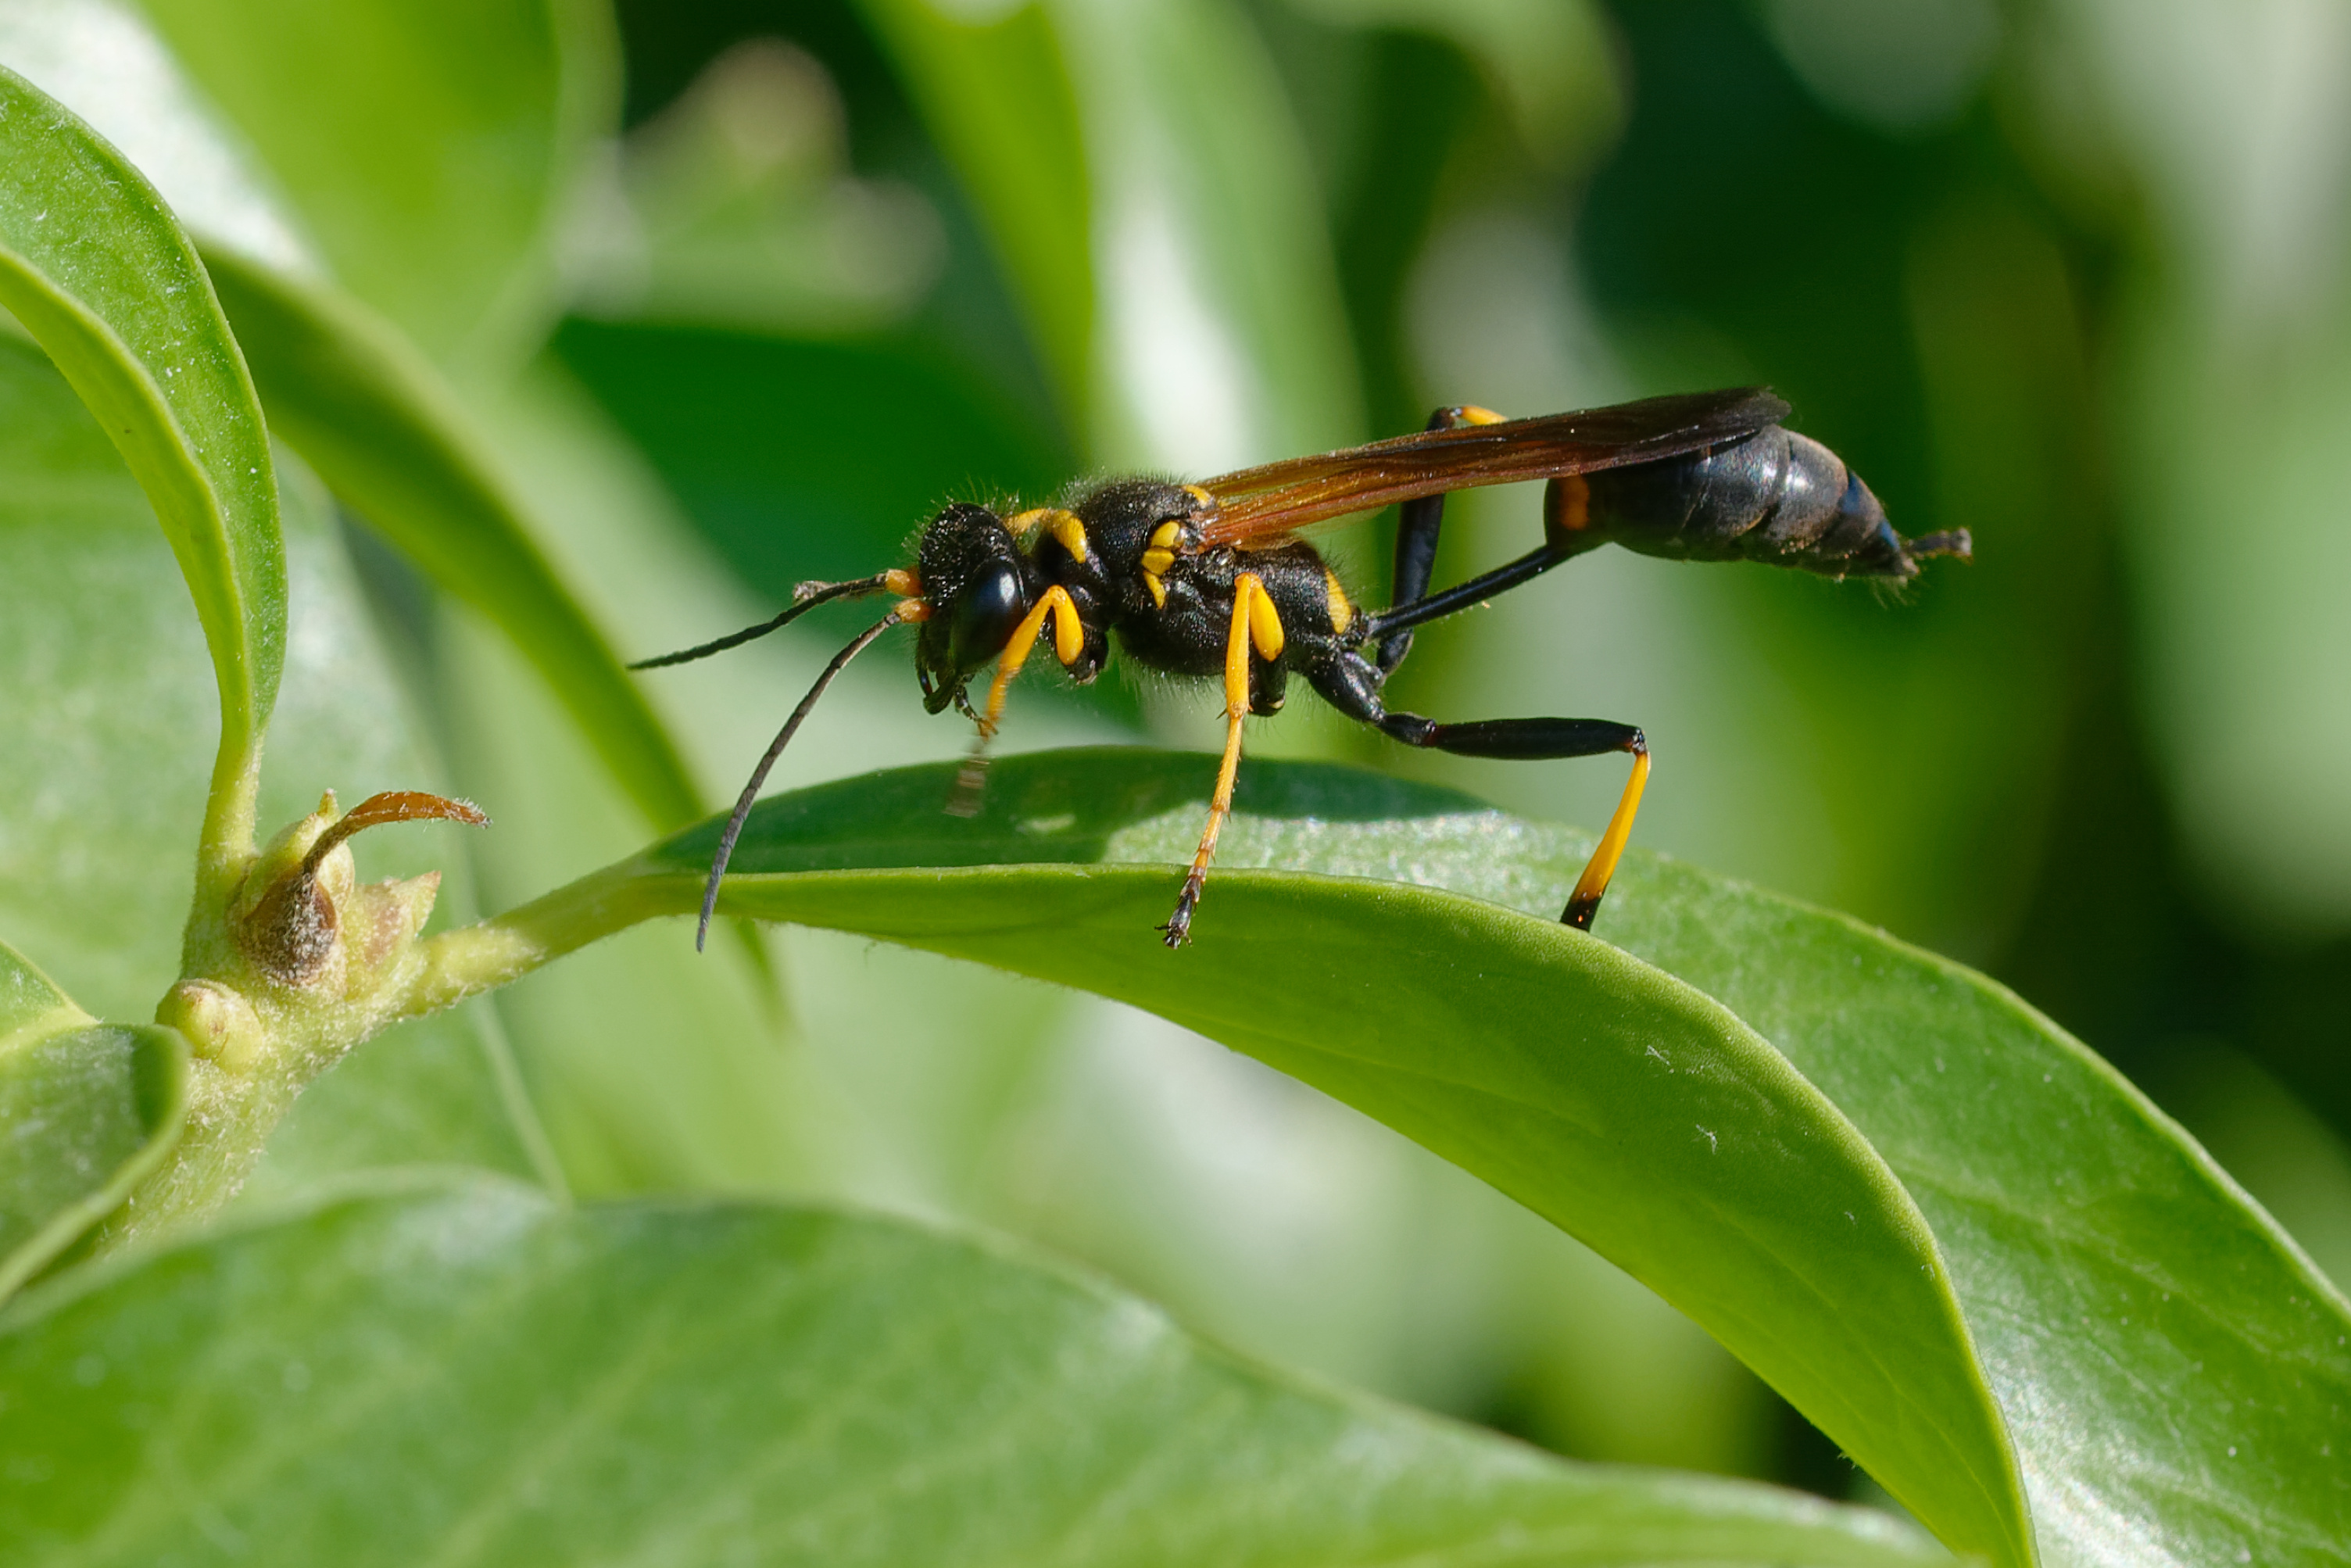 A maud dauber wasp - learn about our mud dauber exterminator services in Waco, TX.